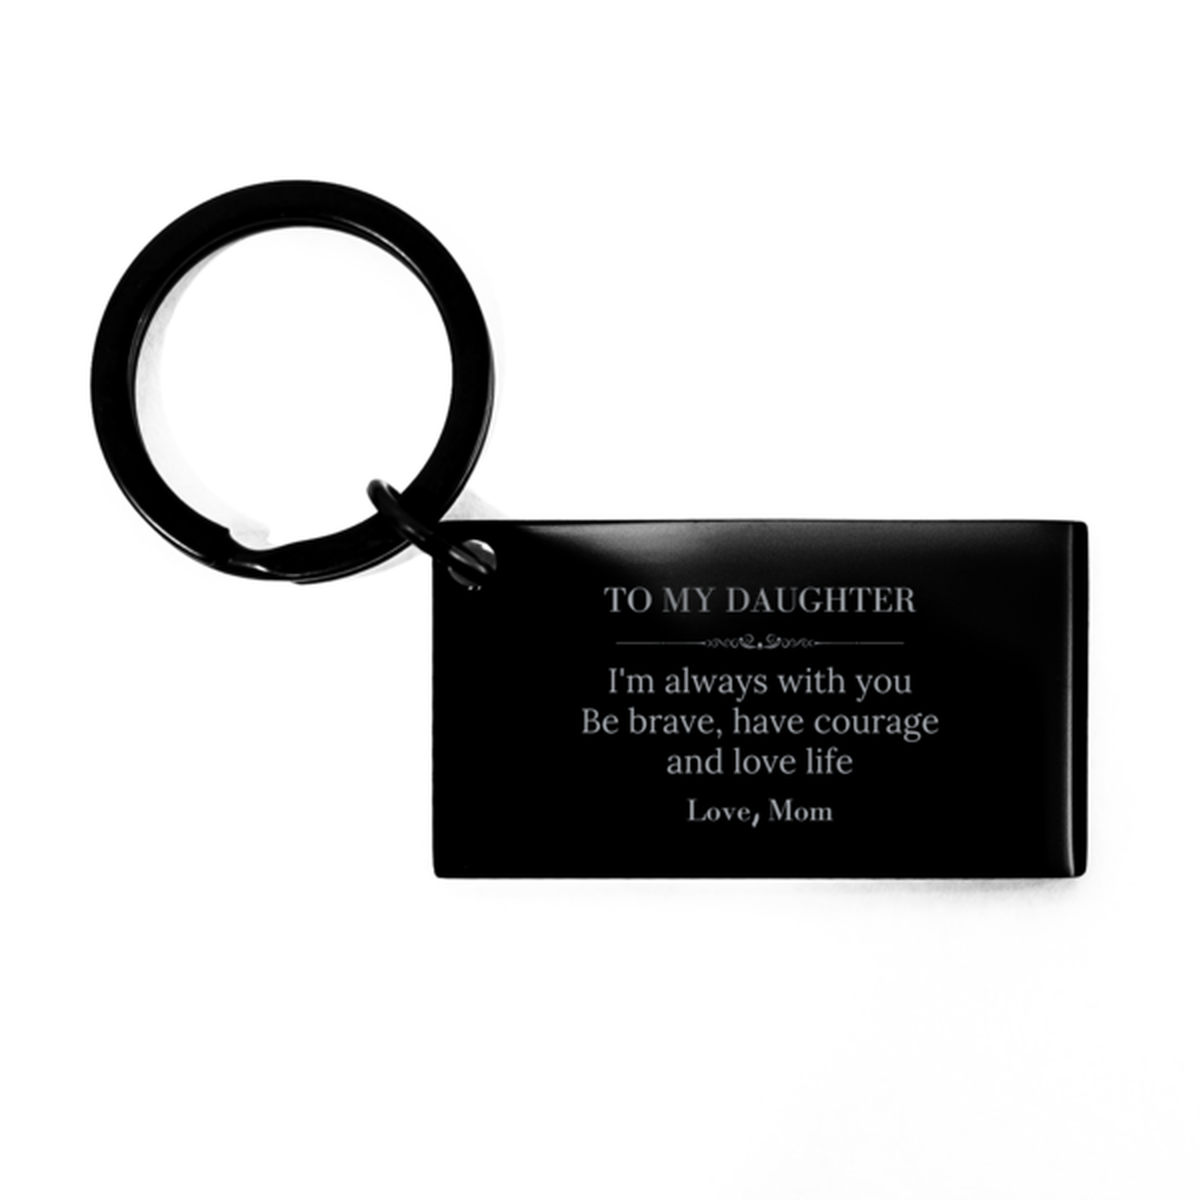 To My Daughter Gifts from Mom, Unique Keychain Inspirational Christmas Birthday Graduation Gifts for Daughter I'm always with you. Be brave, have courage and love life. Love, Mom